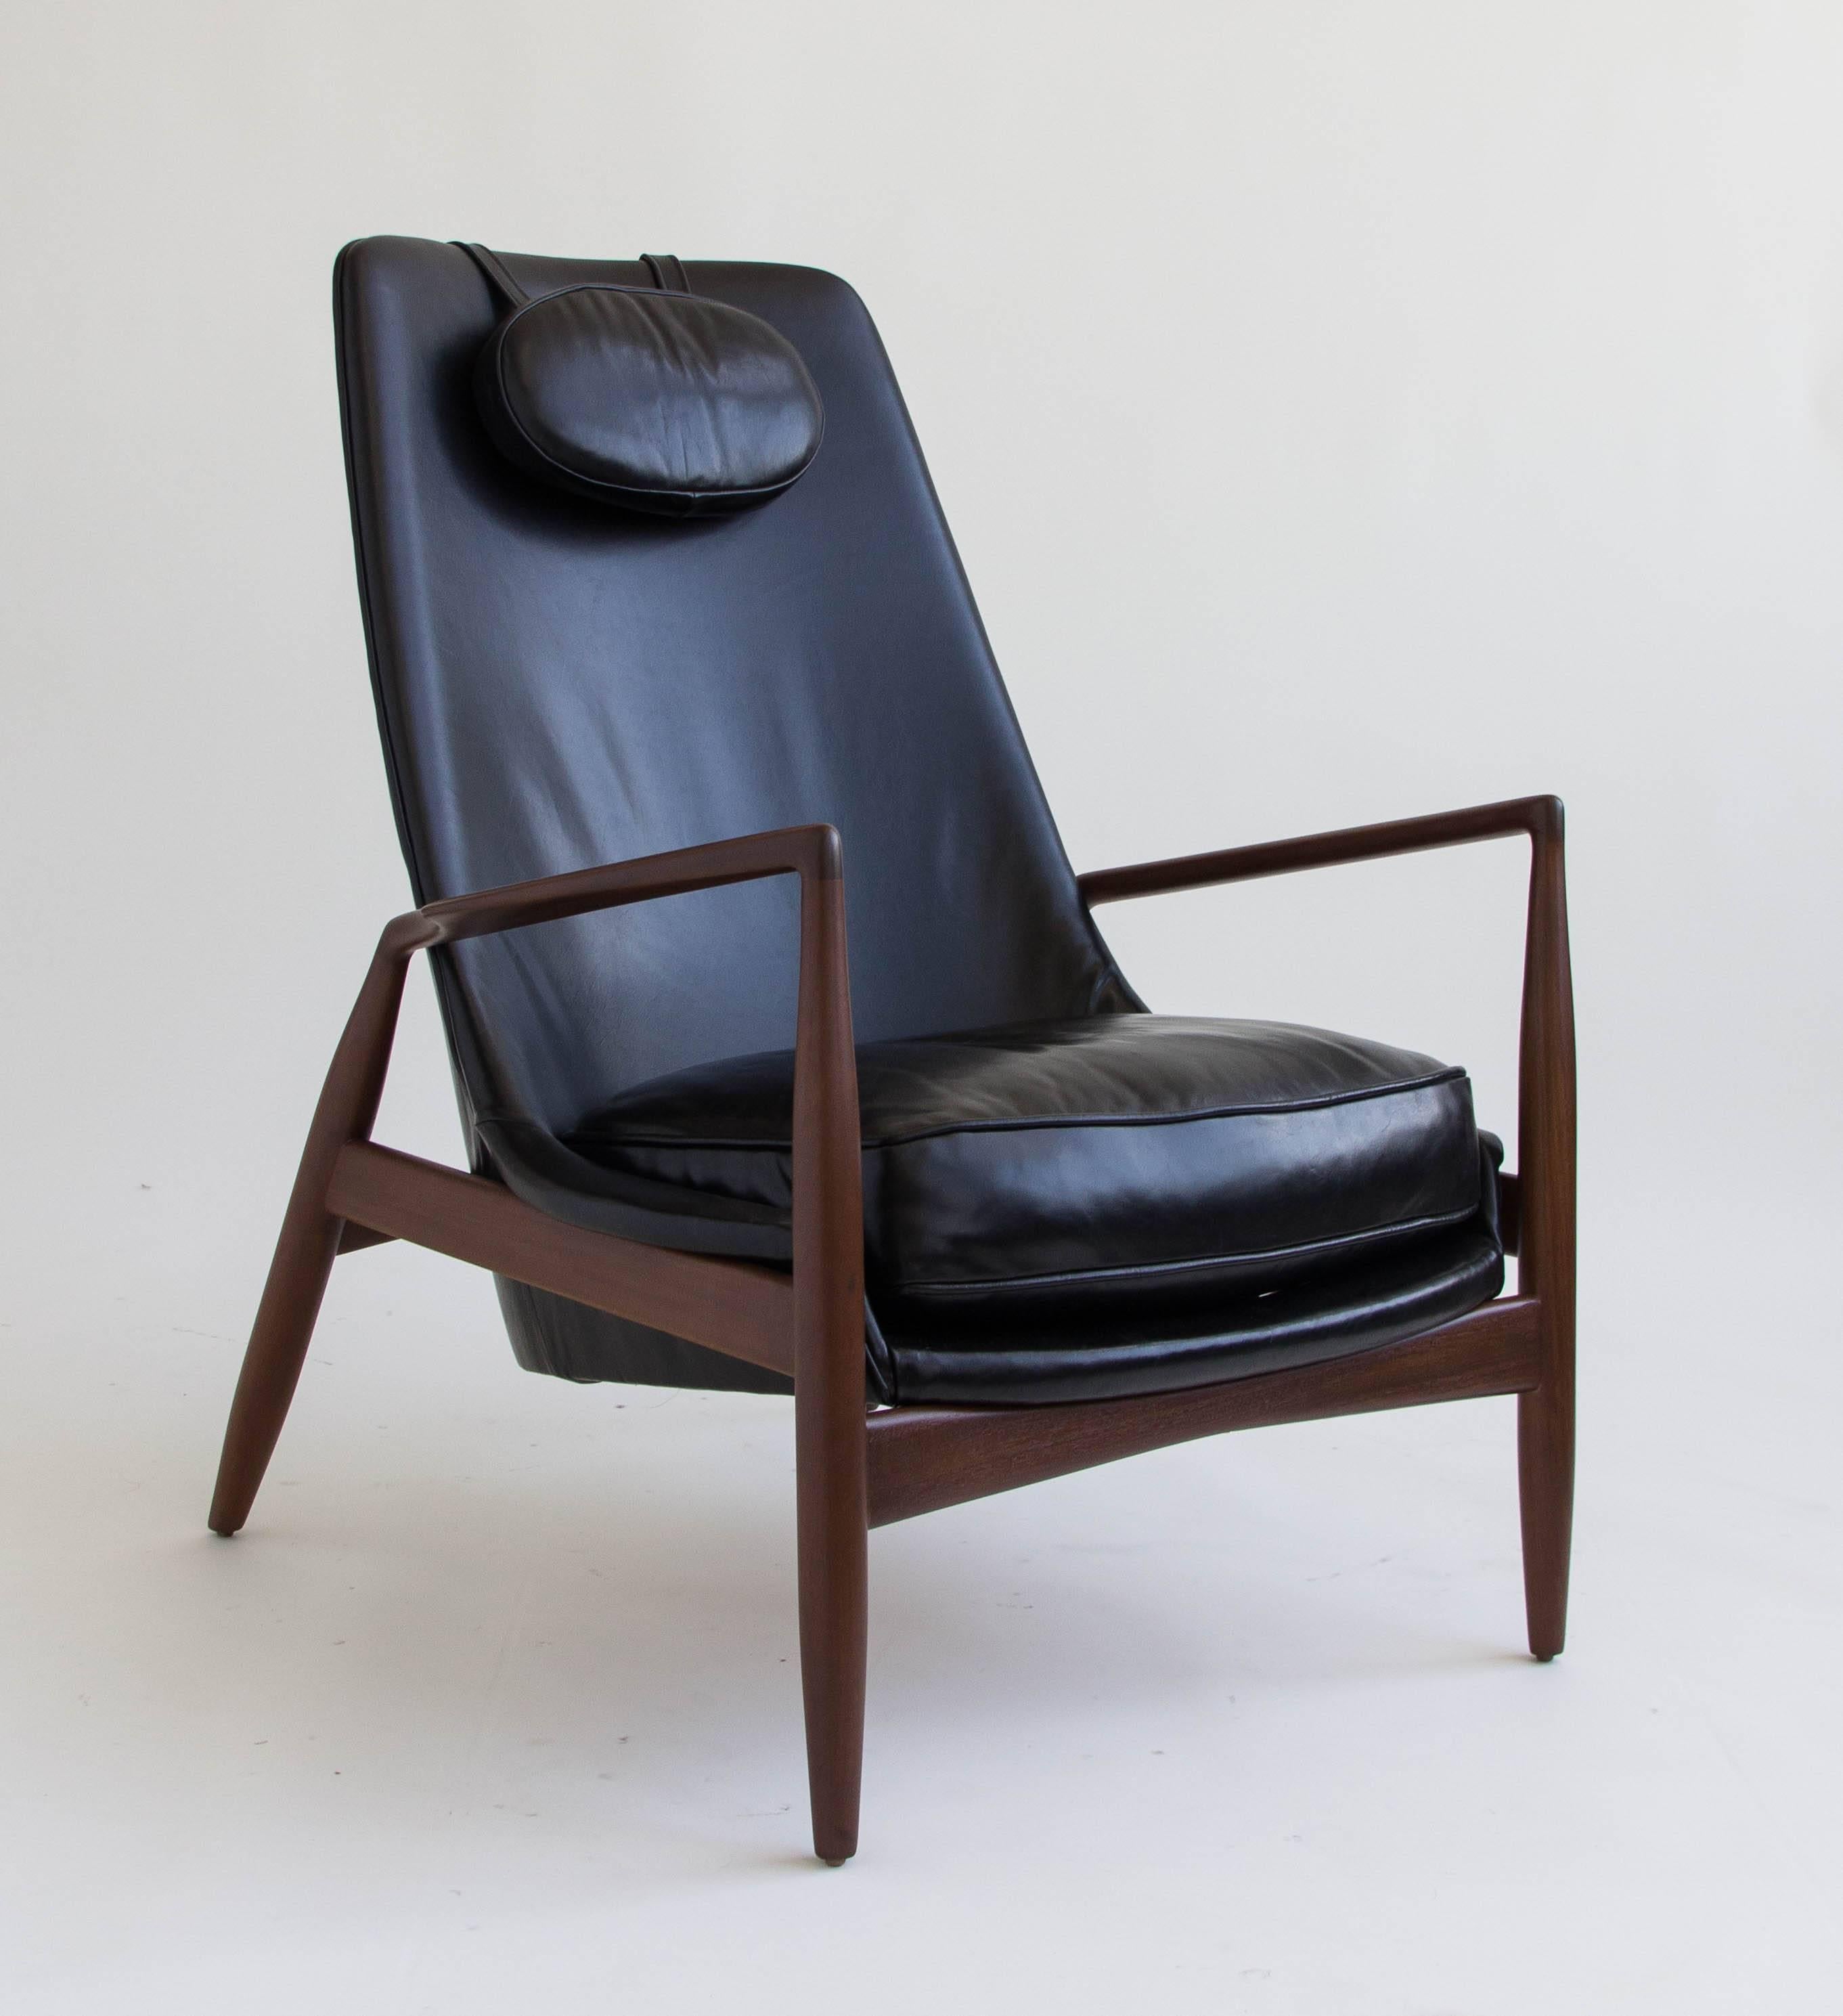 High-backed seal chair by Ib Kofod-Larsen, manufactured by OPE of Sweden. This lounge chair has been re-upholstered in sumptuous black leather. The chair sits at a reclining angle on a slender teak frame with sculpted armrests. Stamped “Made in